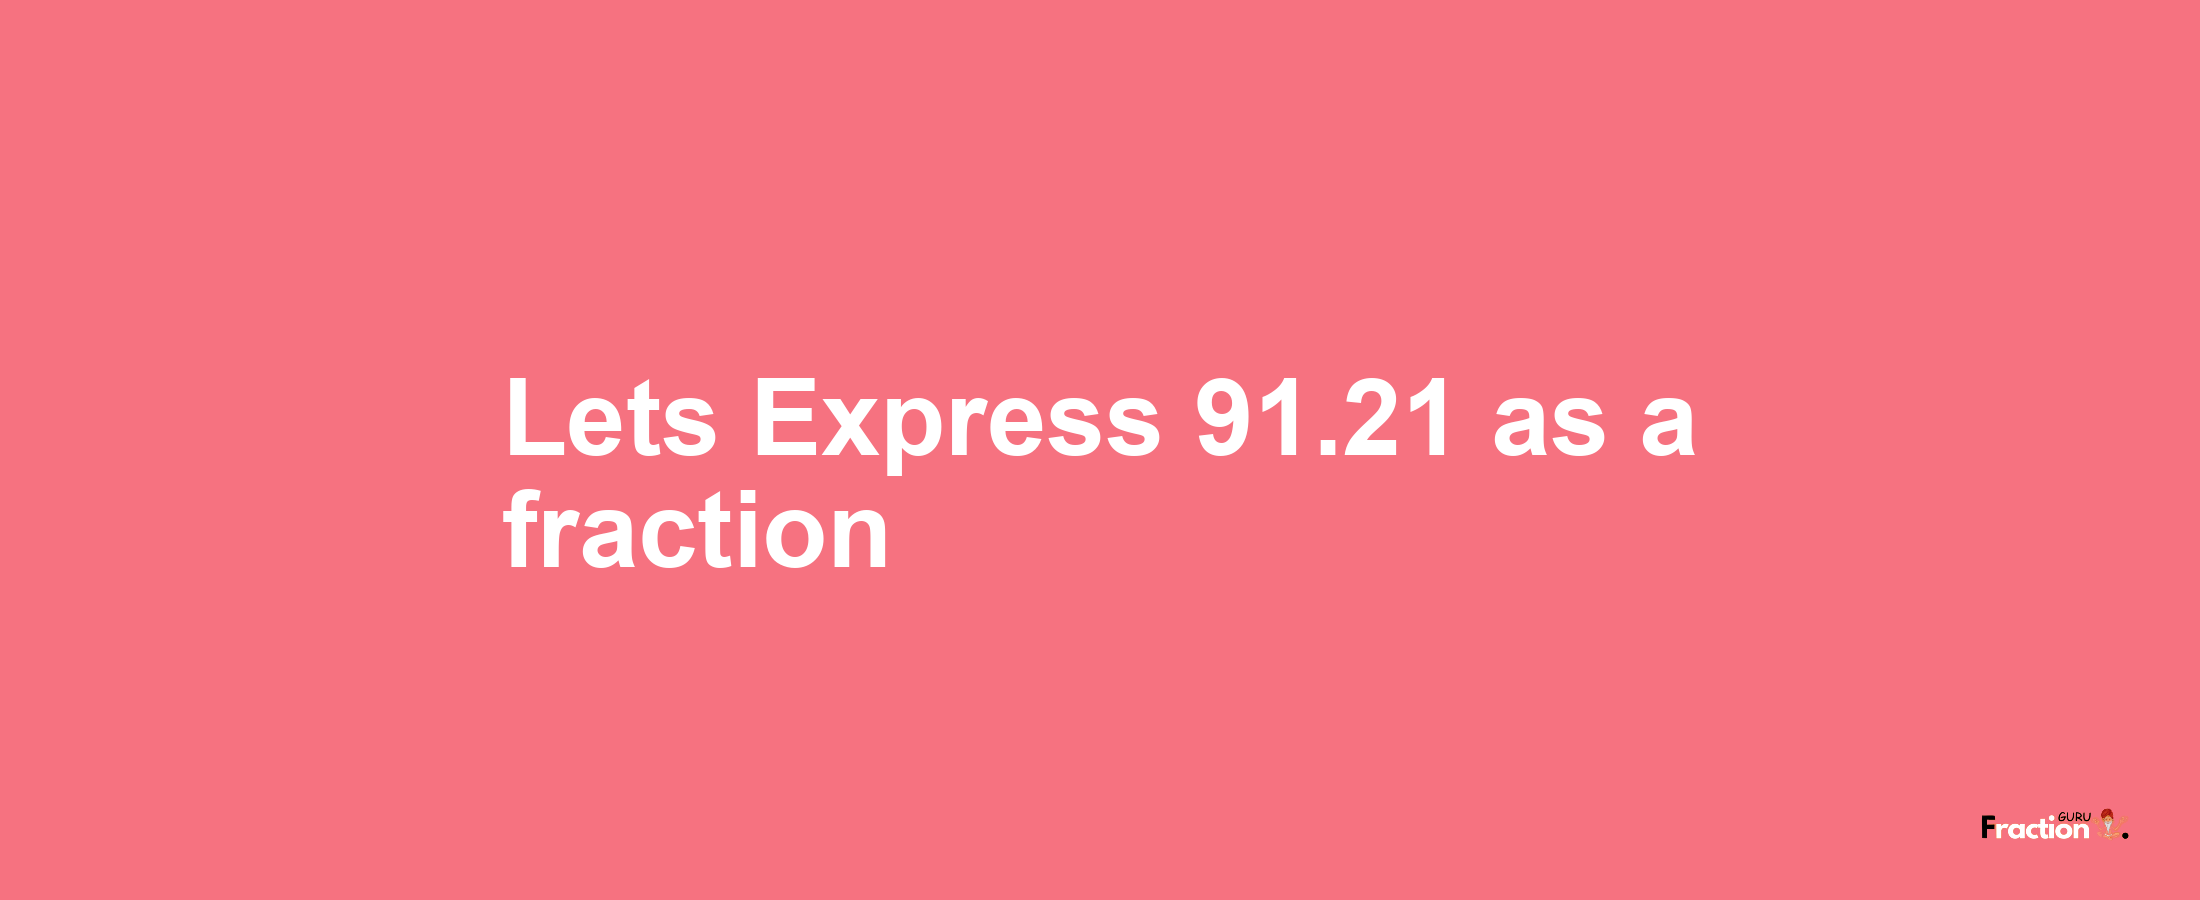 Lets Express 91.21 as afraction